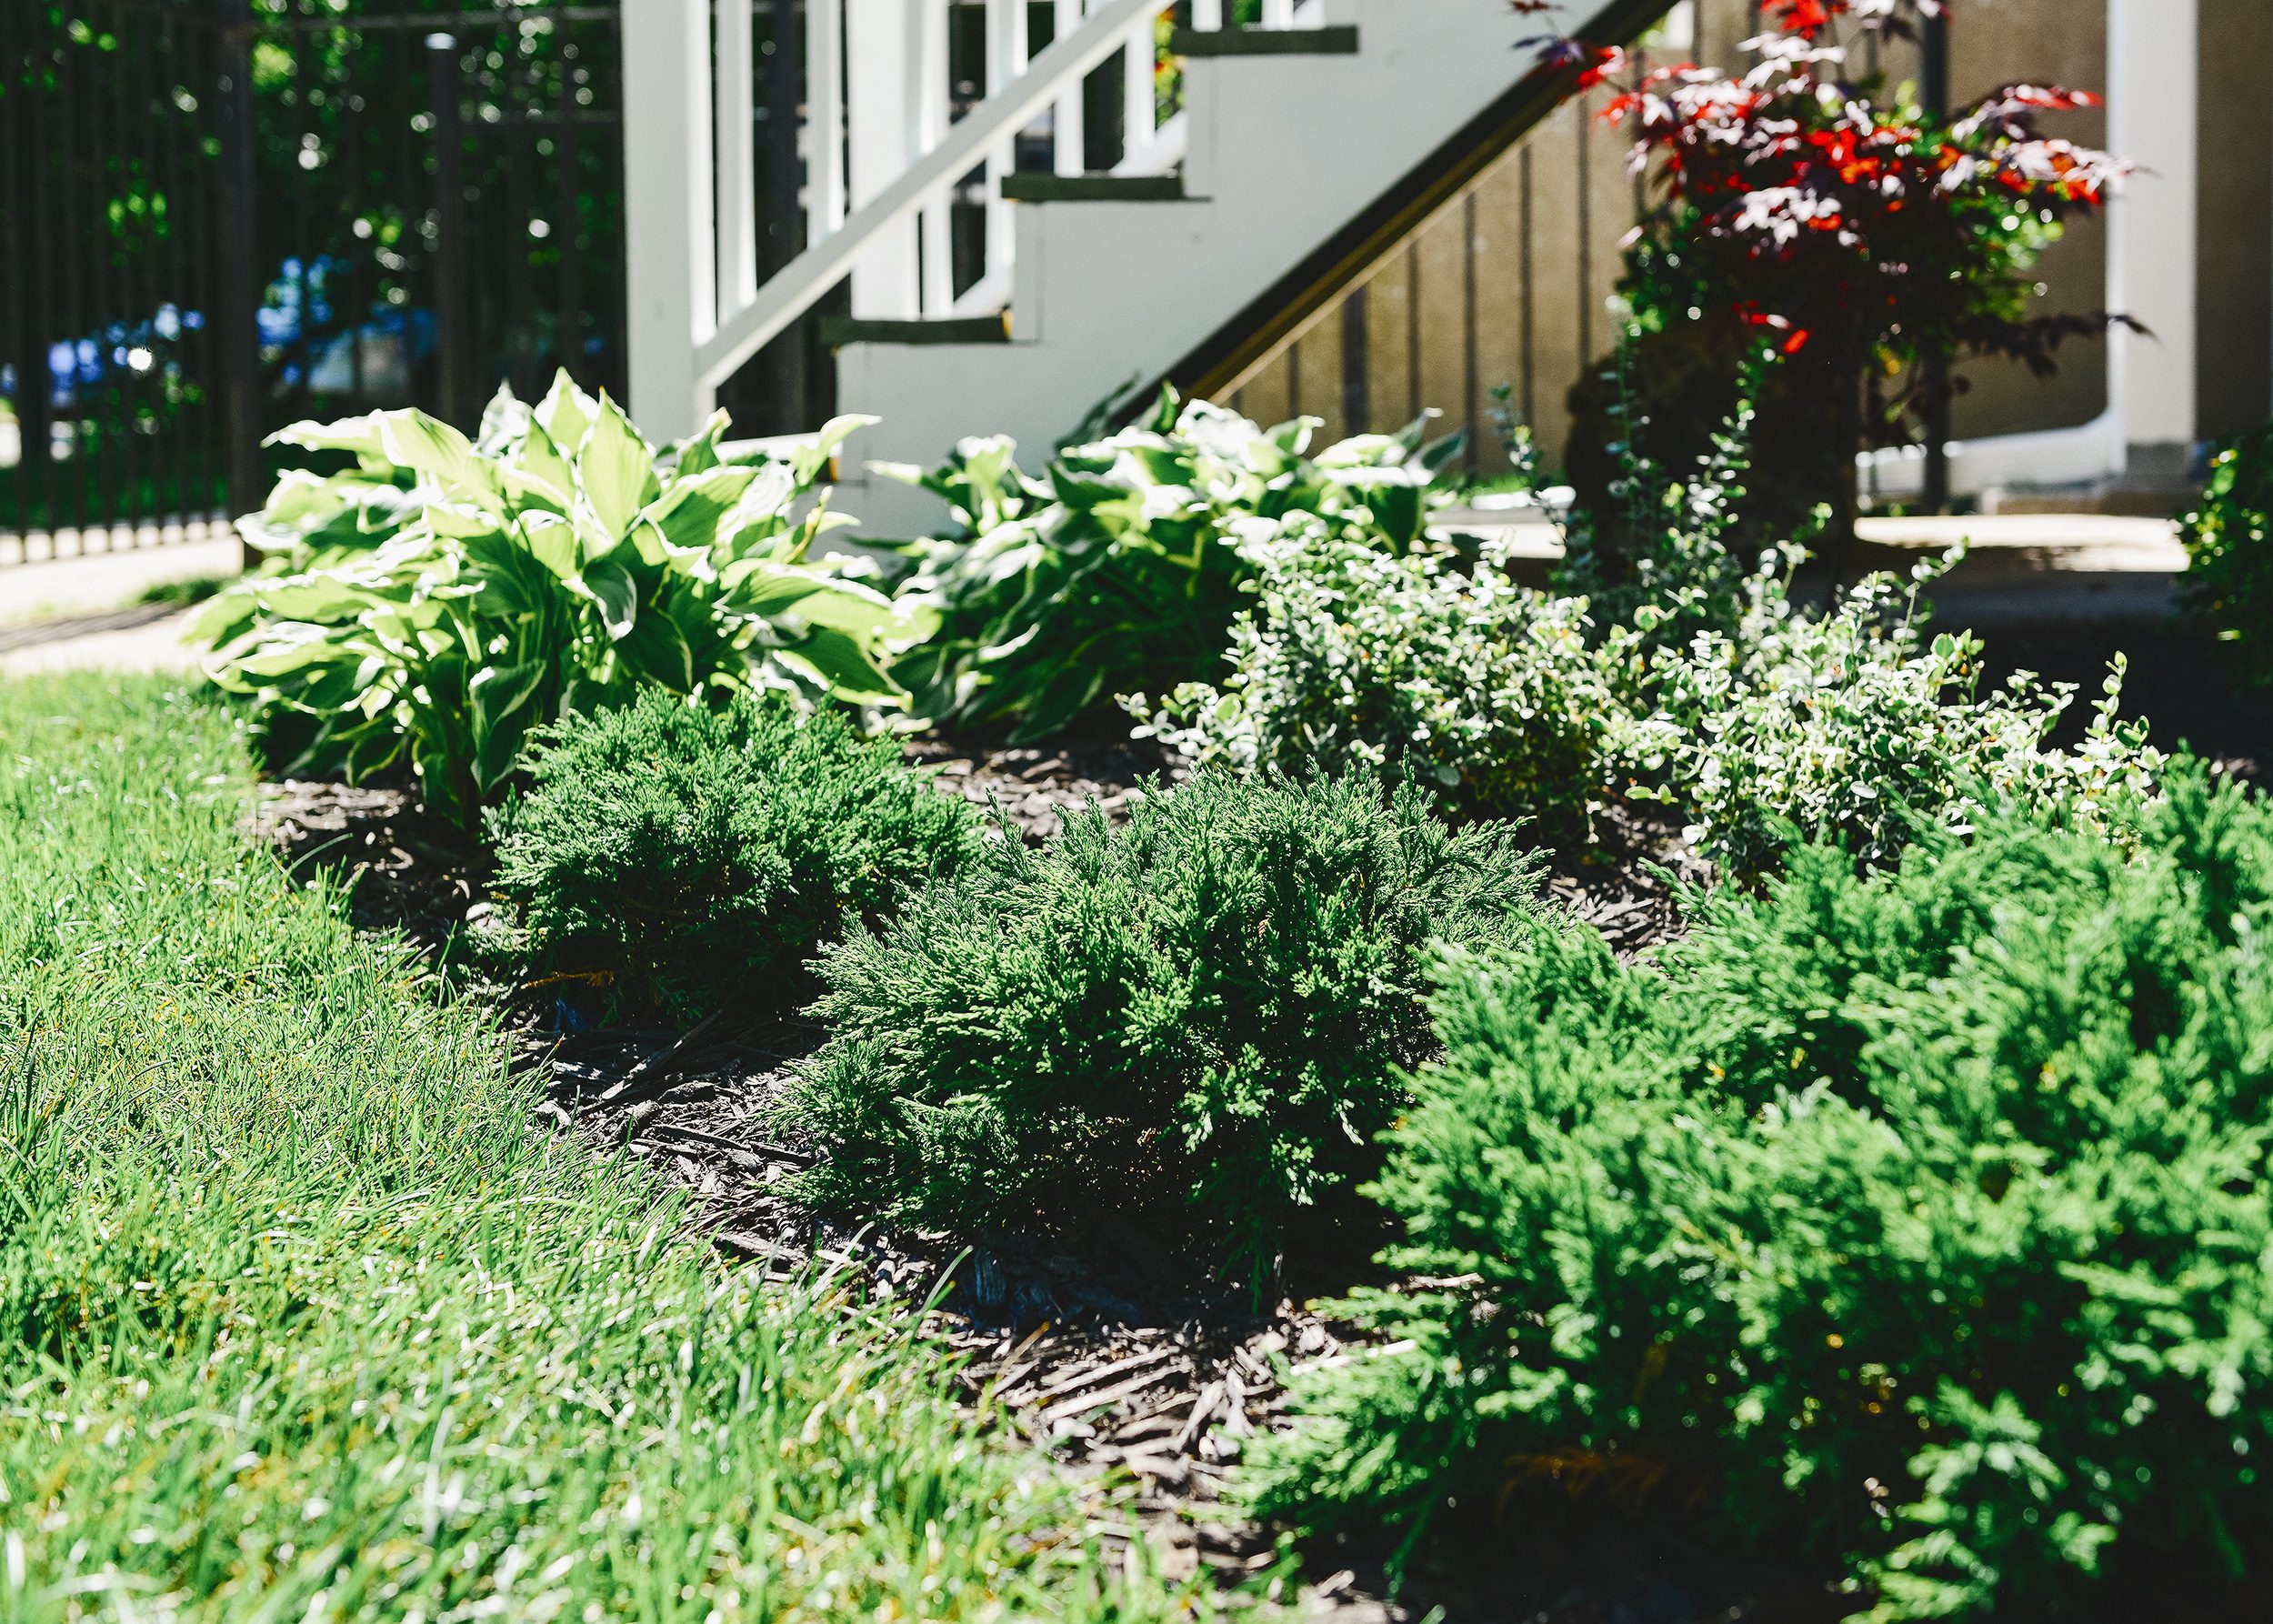 A small front yard garden at the Two Flat | When you should you prune your garden this spring? via Yellow Brick Home